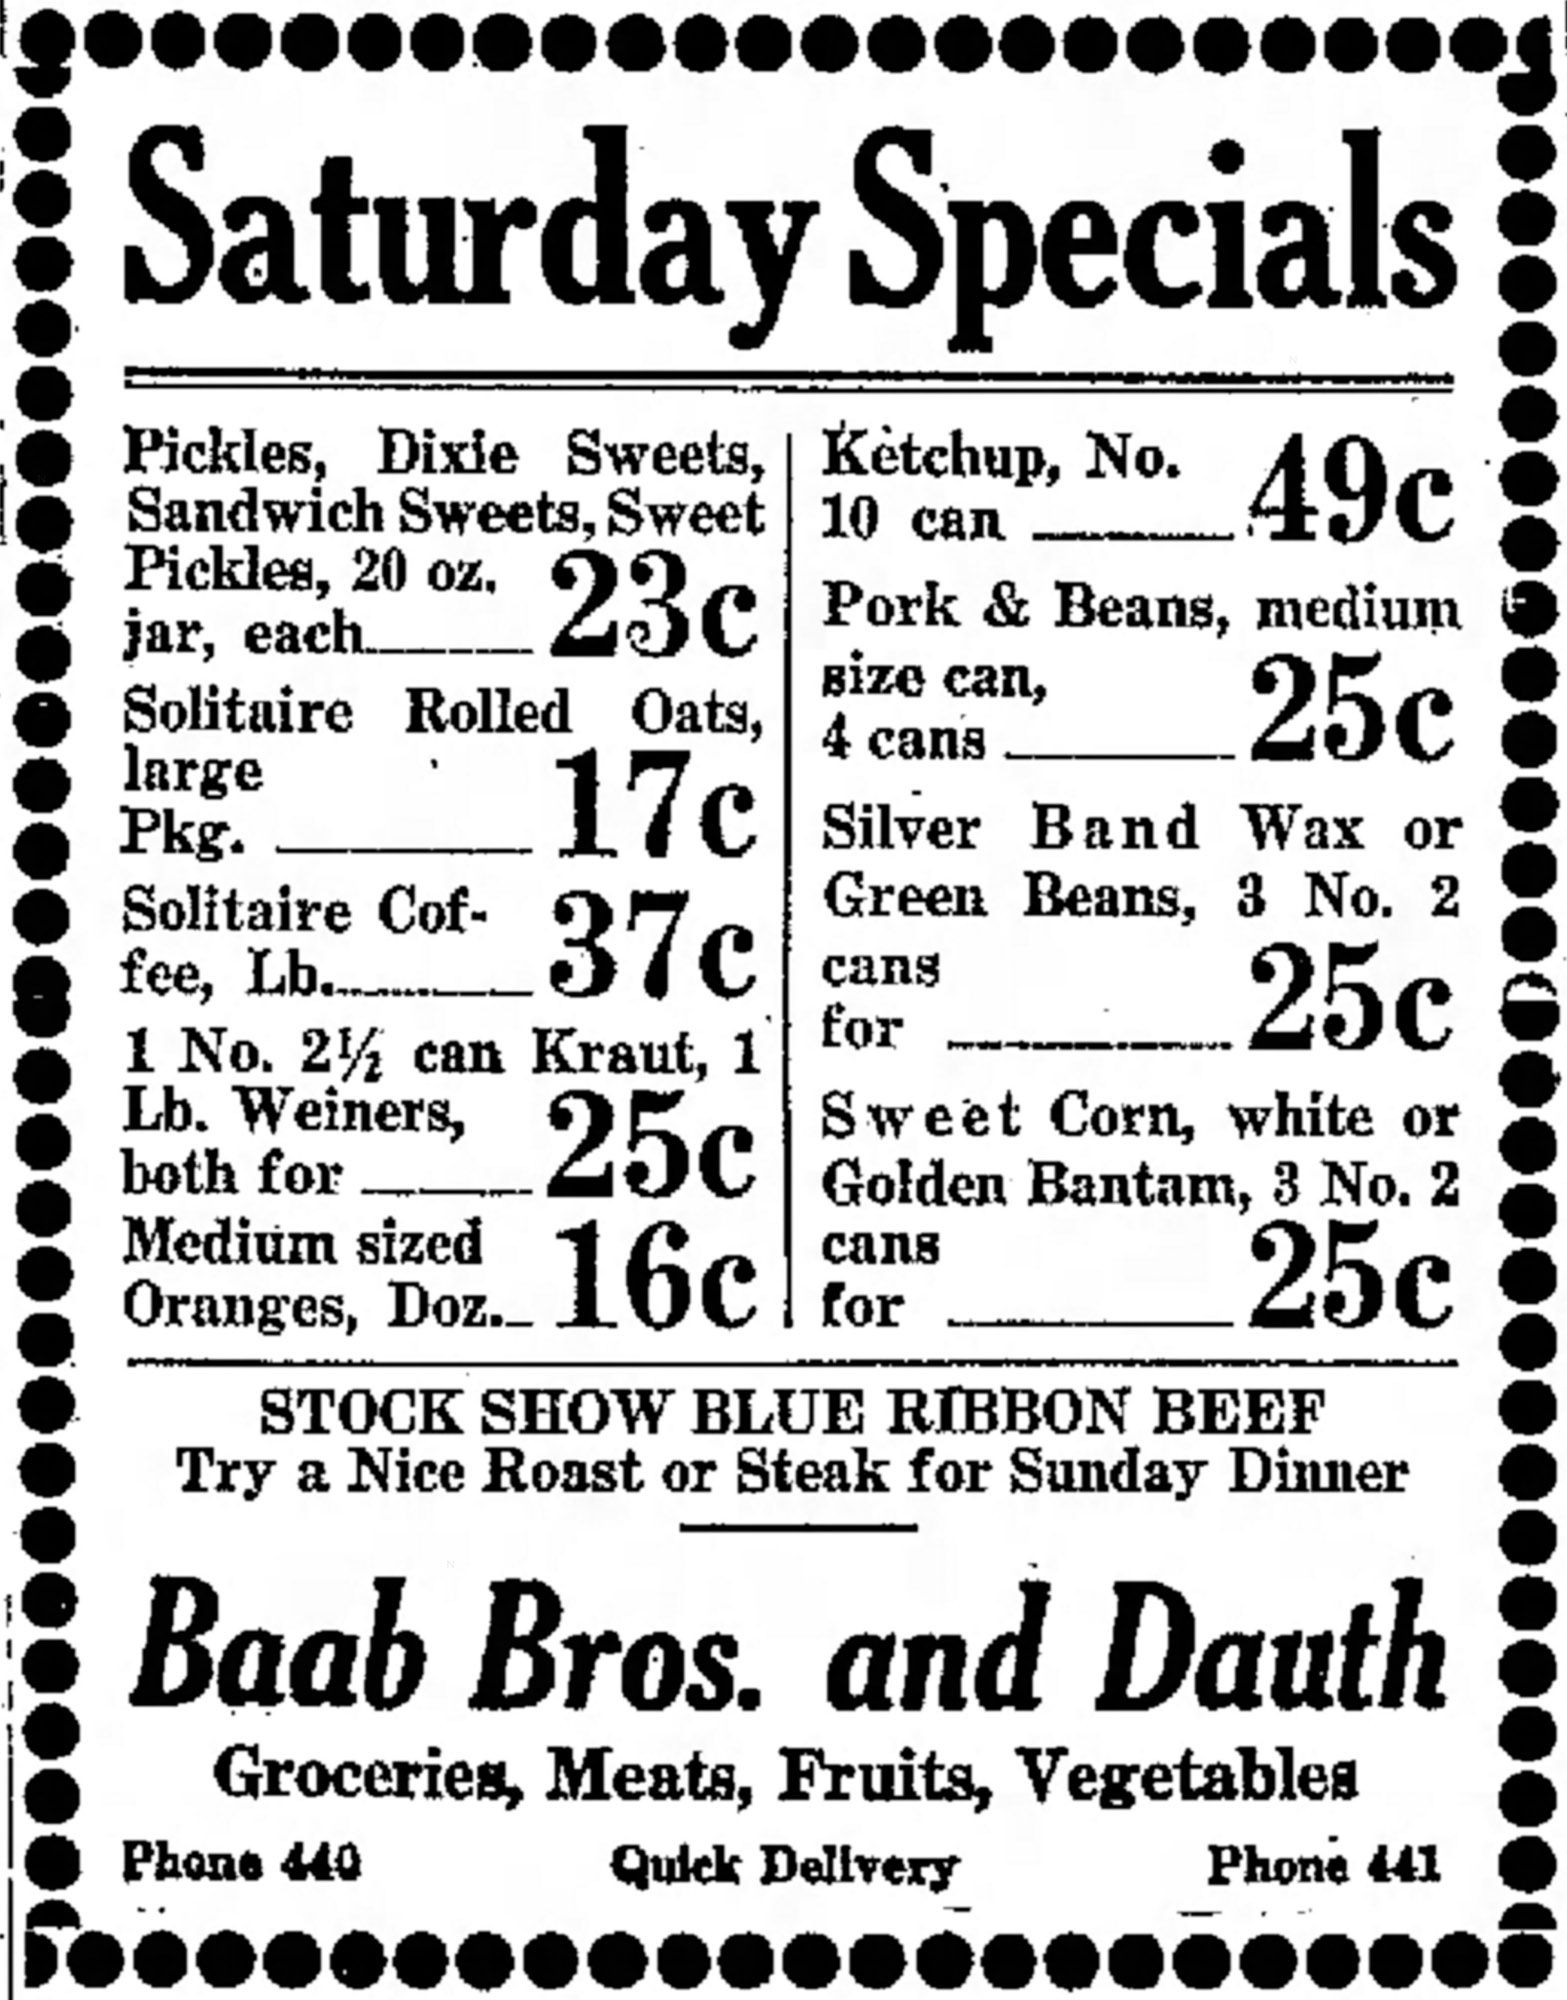 Dauth Family Archive - 1932-01-29 - Greeley Daily Tribune - Baab Bros and Dauth Advertisement